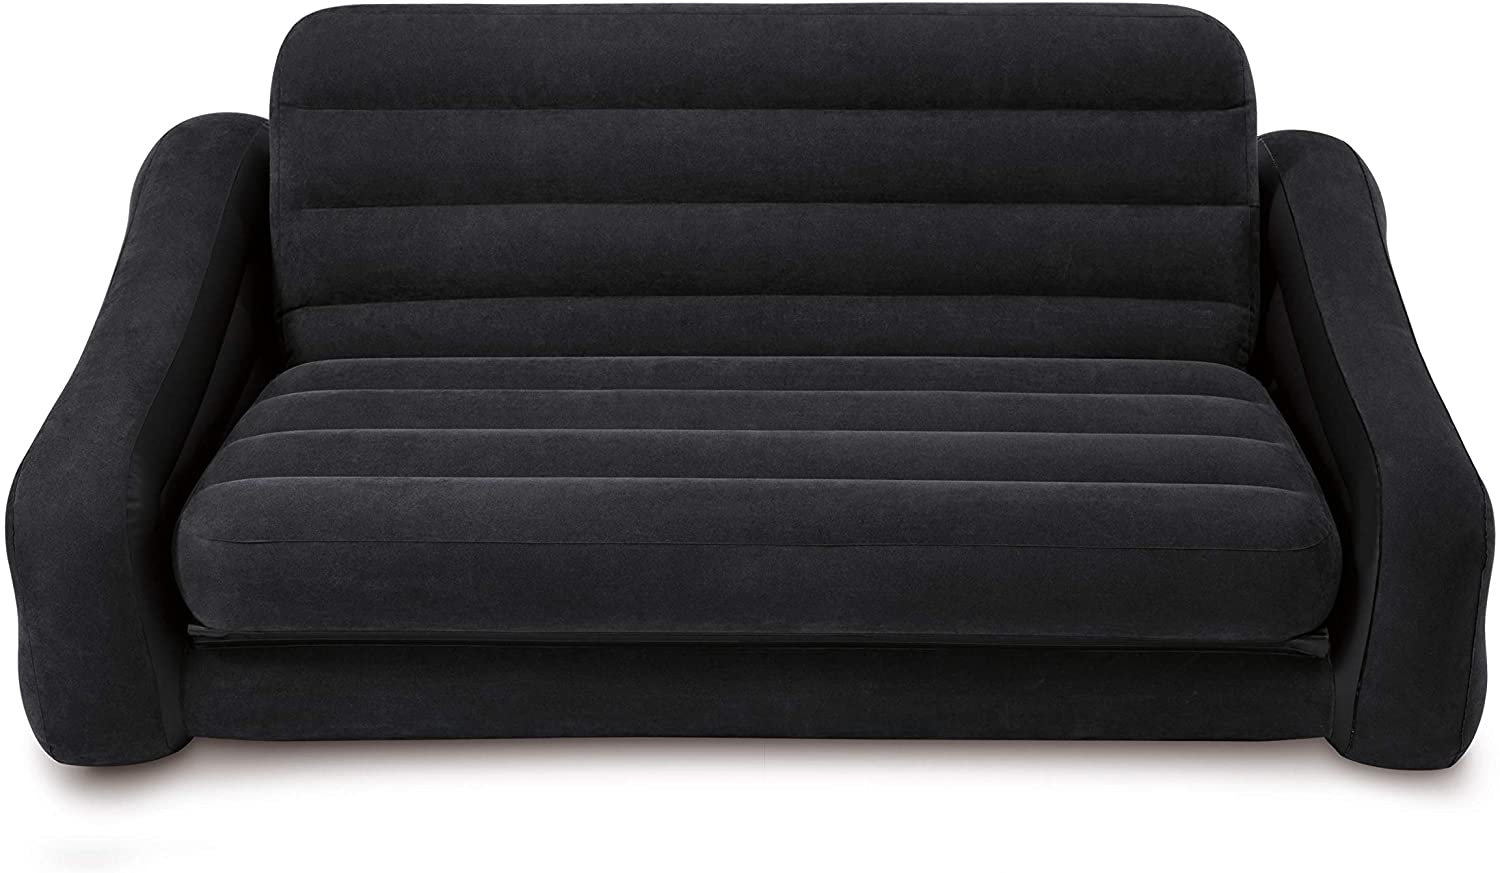 Intex Pull Out Sofa Inflatable Bed, Intex Pull Out Sofa Tesco